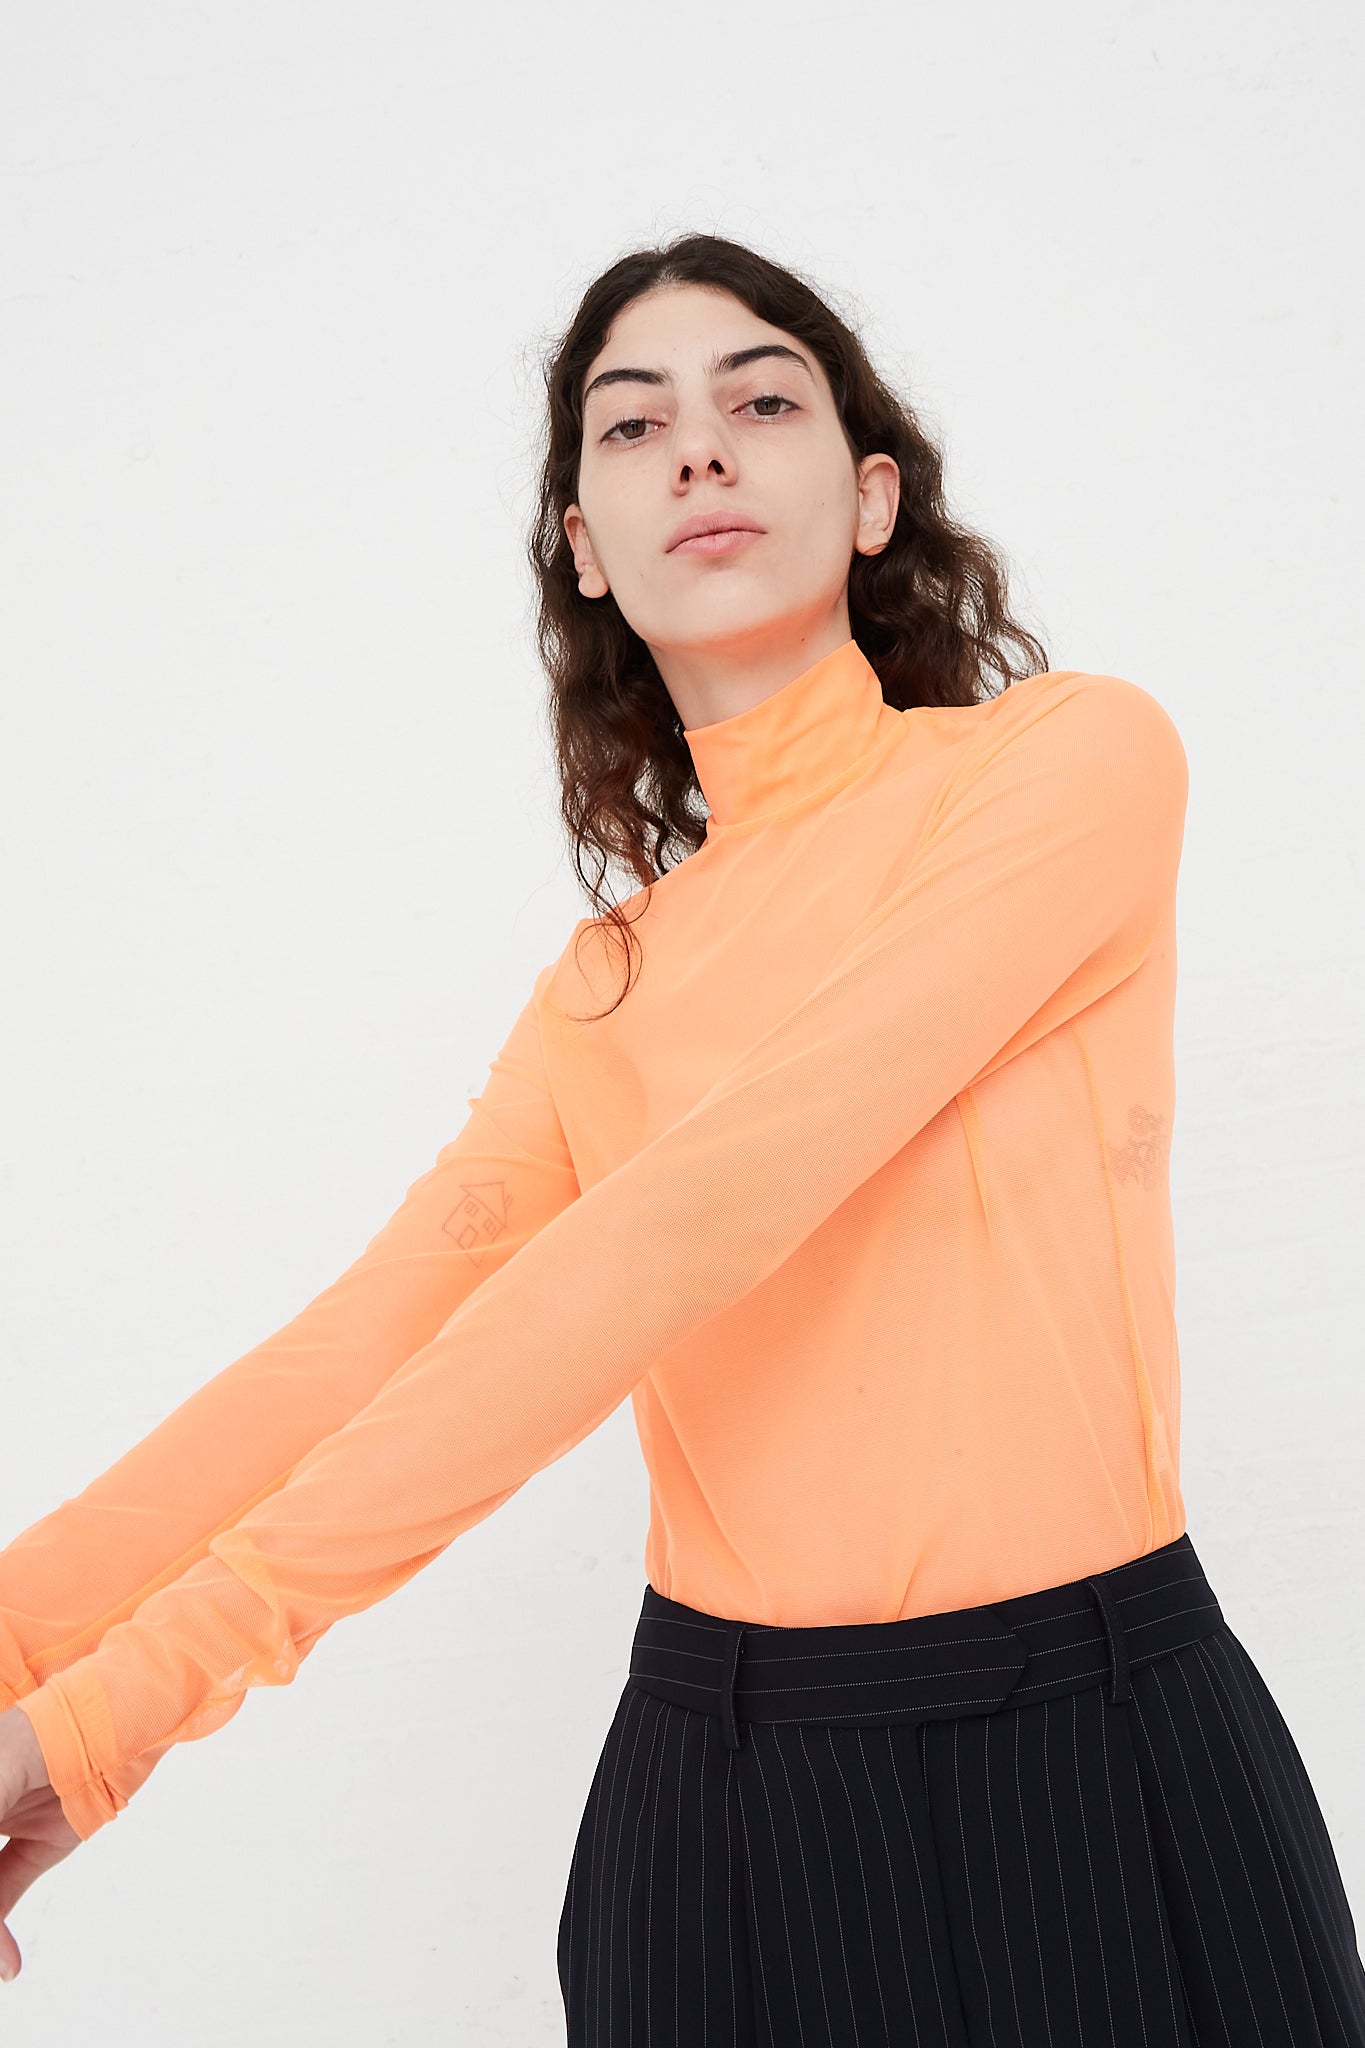 A model wearing a Long Sleeve Mesh Mockneck in Fluoro Orange top and black pants designed by Nomia brand.